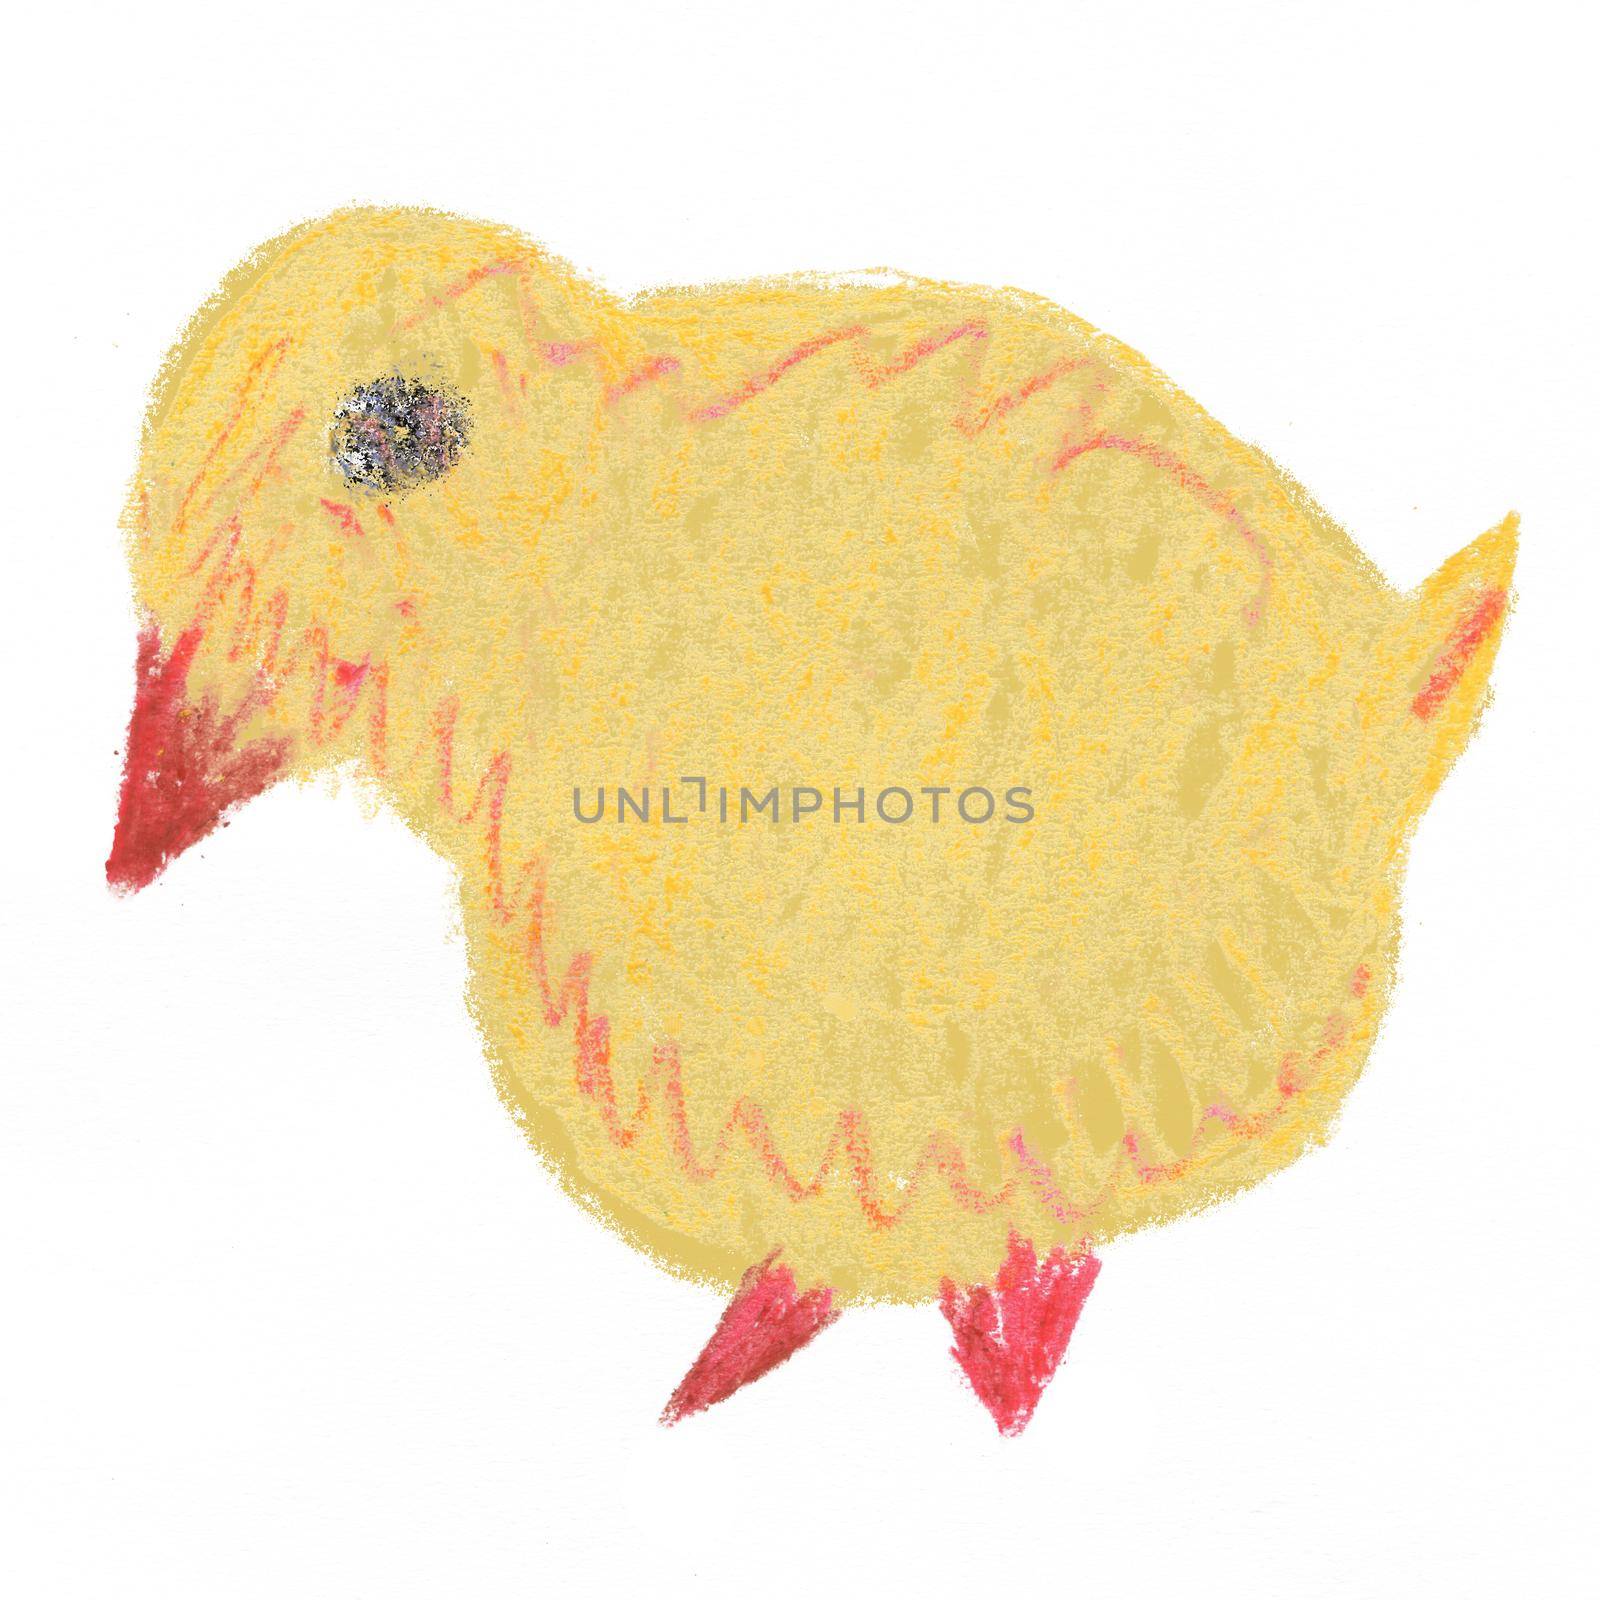 An impression of a chicken. Children drawing. A yellow chicken with a red beak and paws. Watercolor Illustration of Farm Bird.